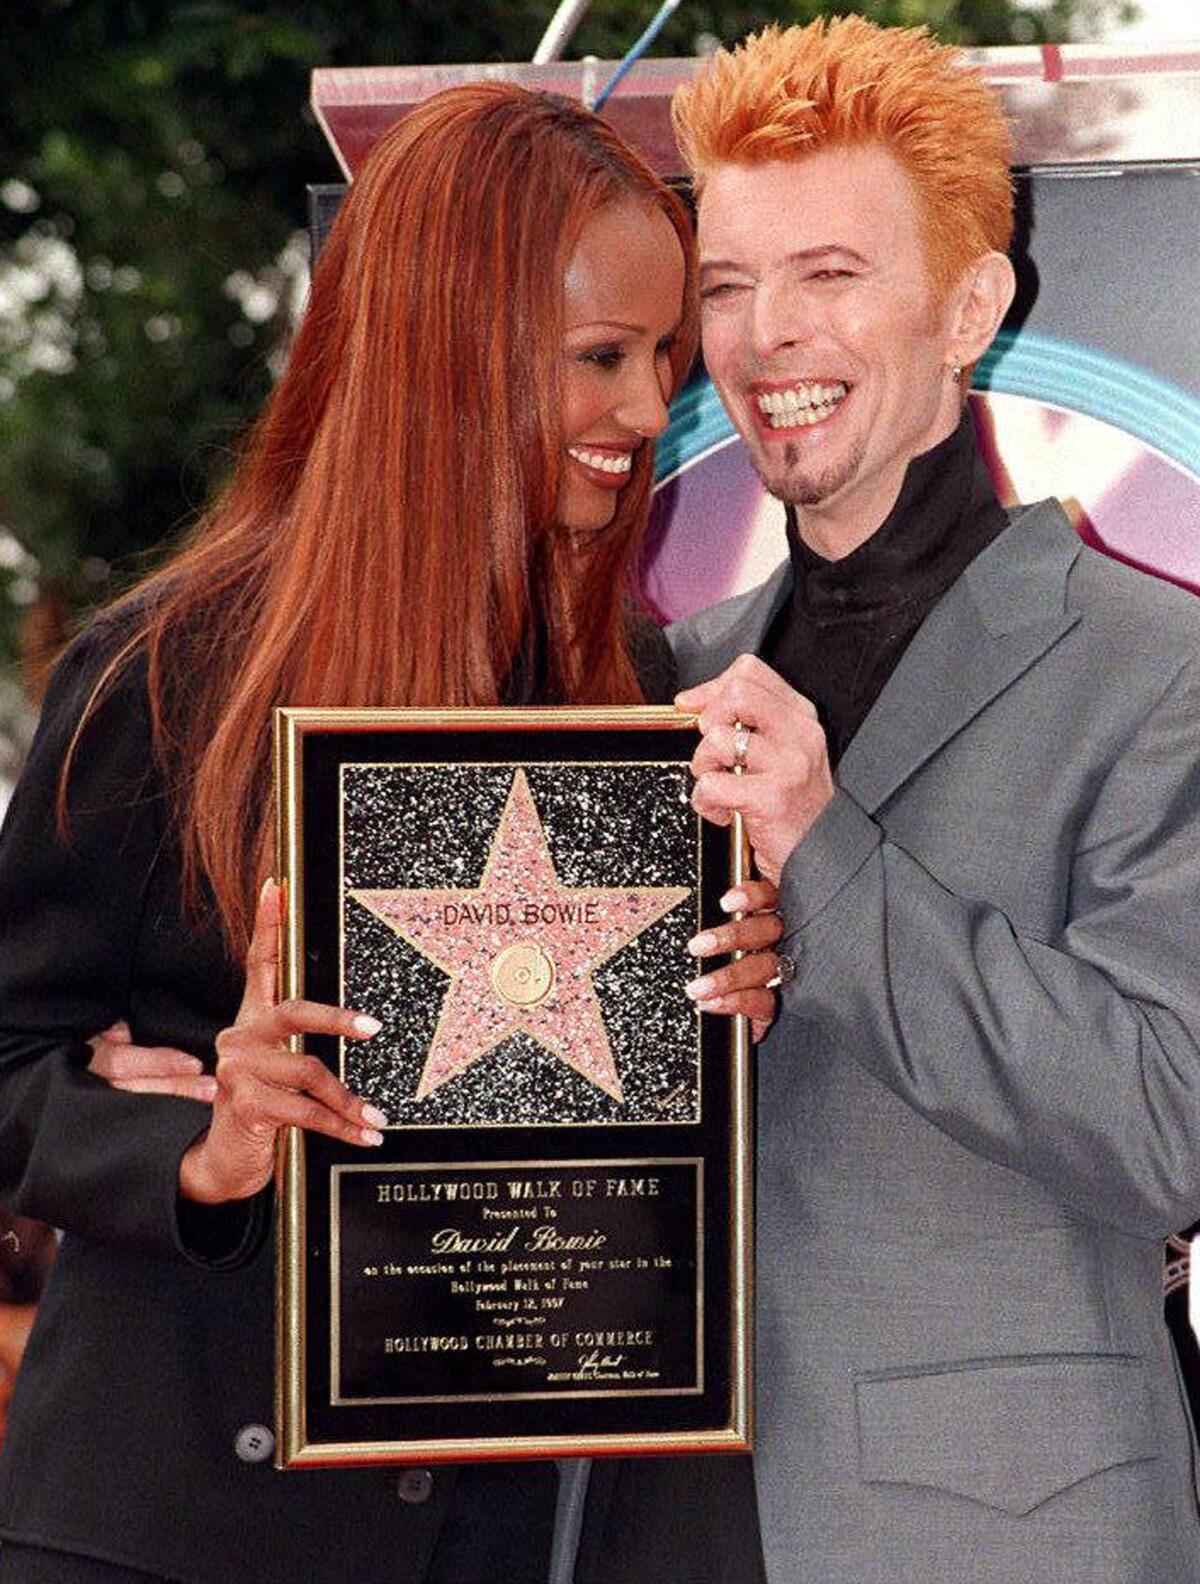 David Bowie and his wife, Iman, smile after Bowie received a star on the Walk of Fame in Hollywood on Feb. 12, 1997.